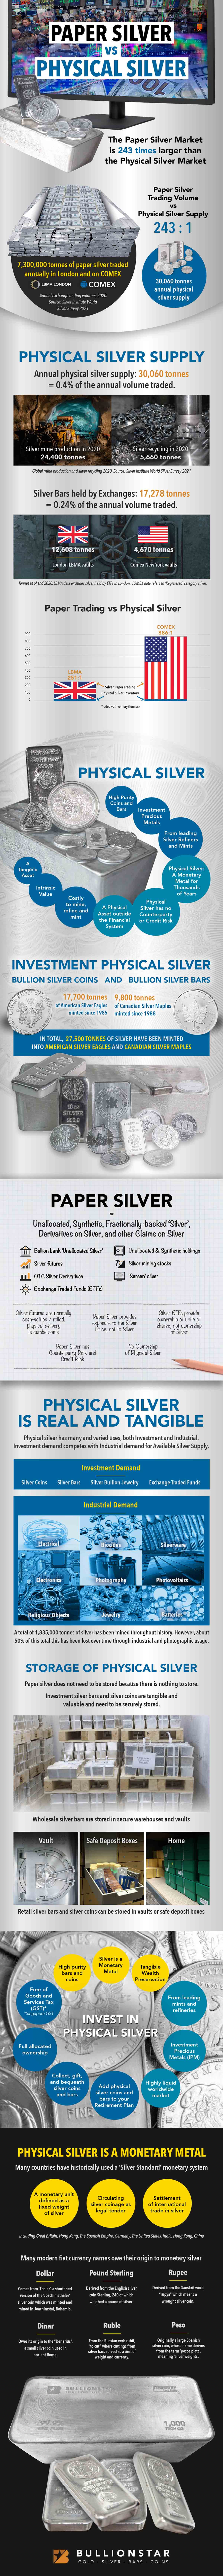 Paper Silver vs Physical Silver